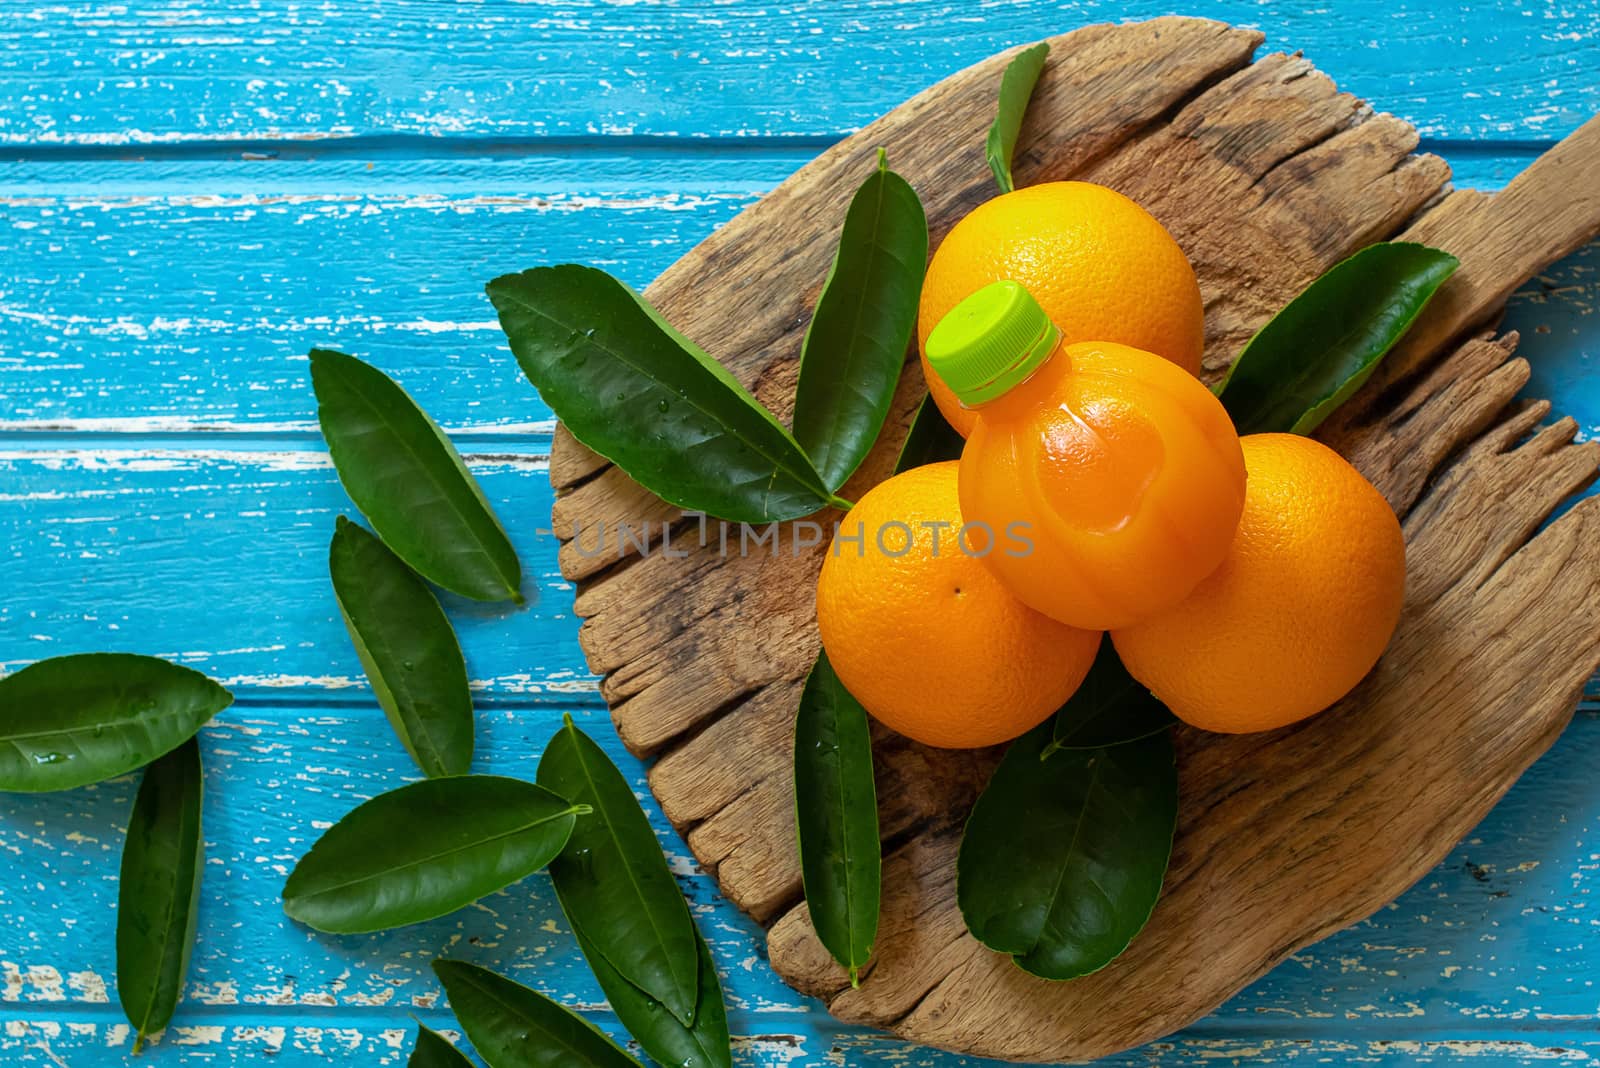 Fresh orange on a wooden table background.